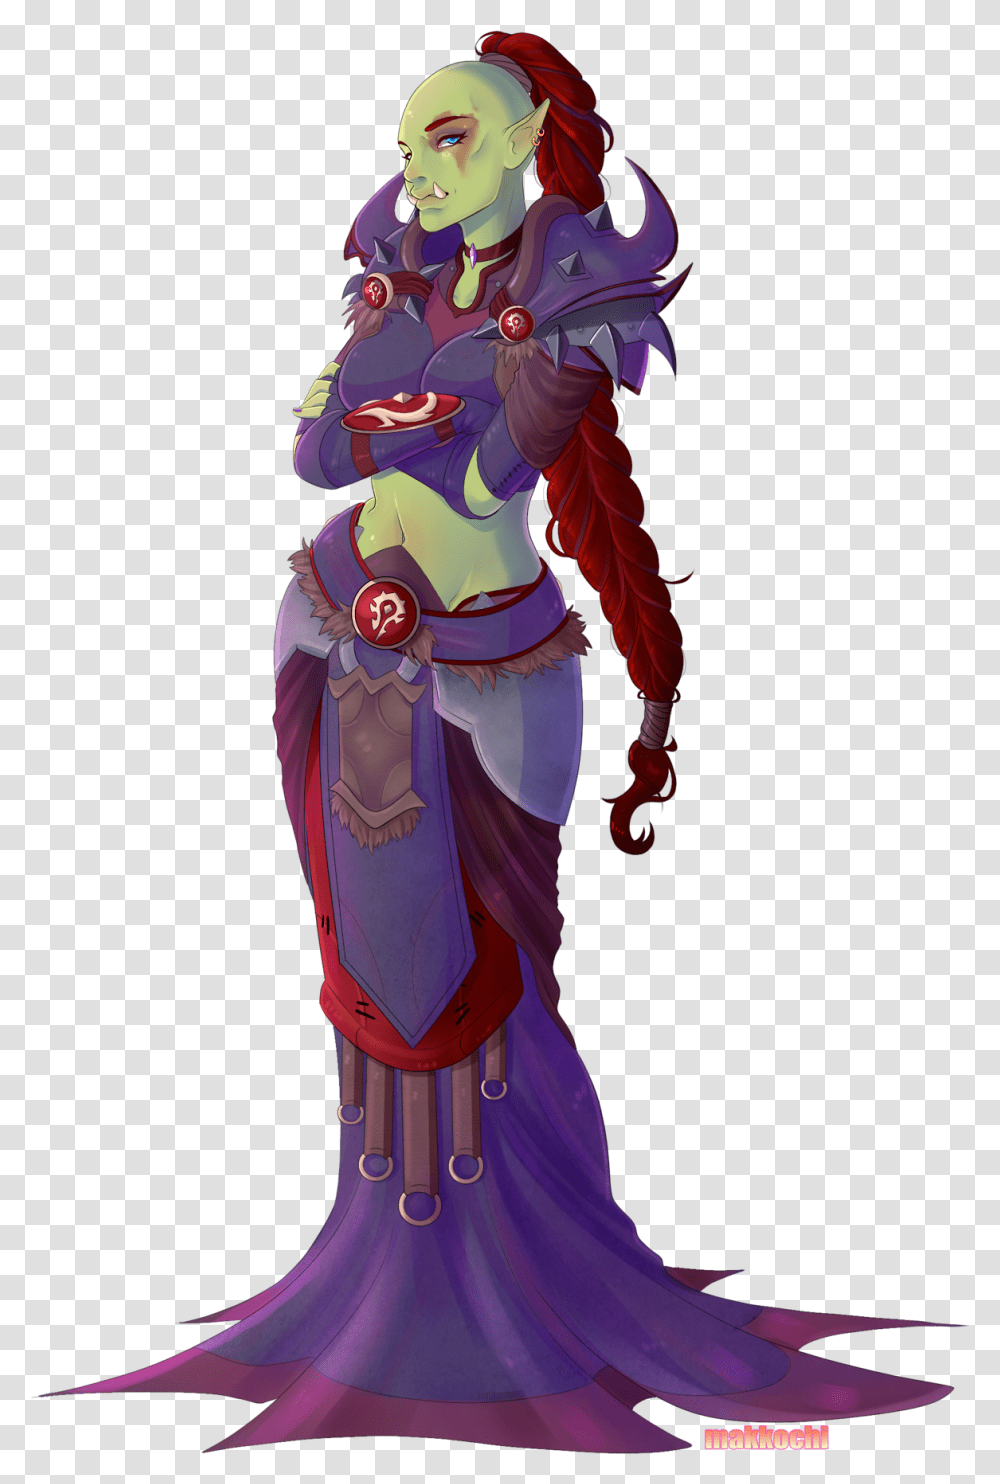 Download Orc Warlock Full Size Image Pngkit Orc Queen, Person, Human, Clothing, Apparel Transparent Png